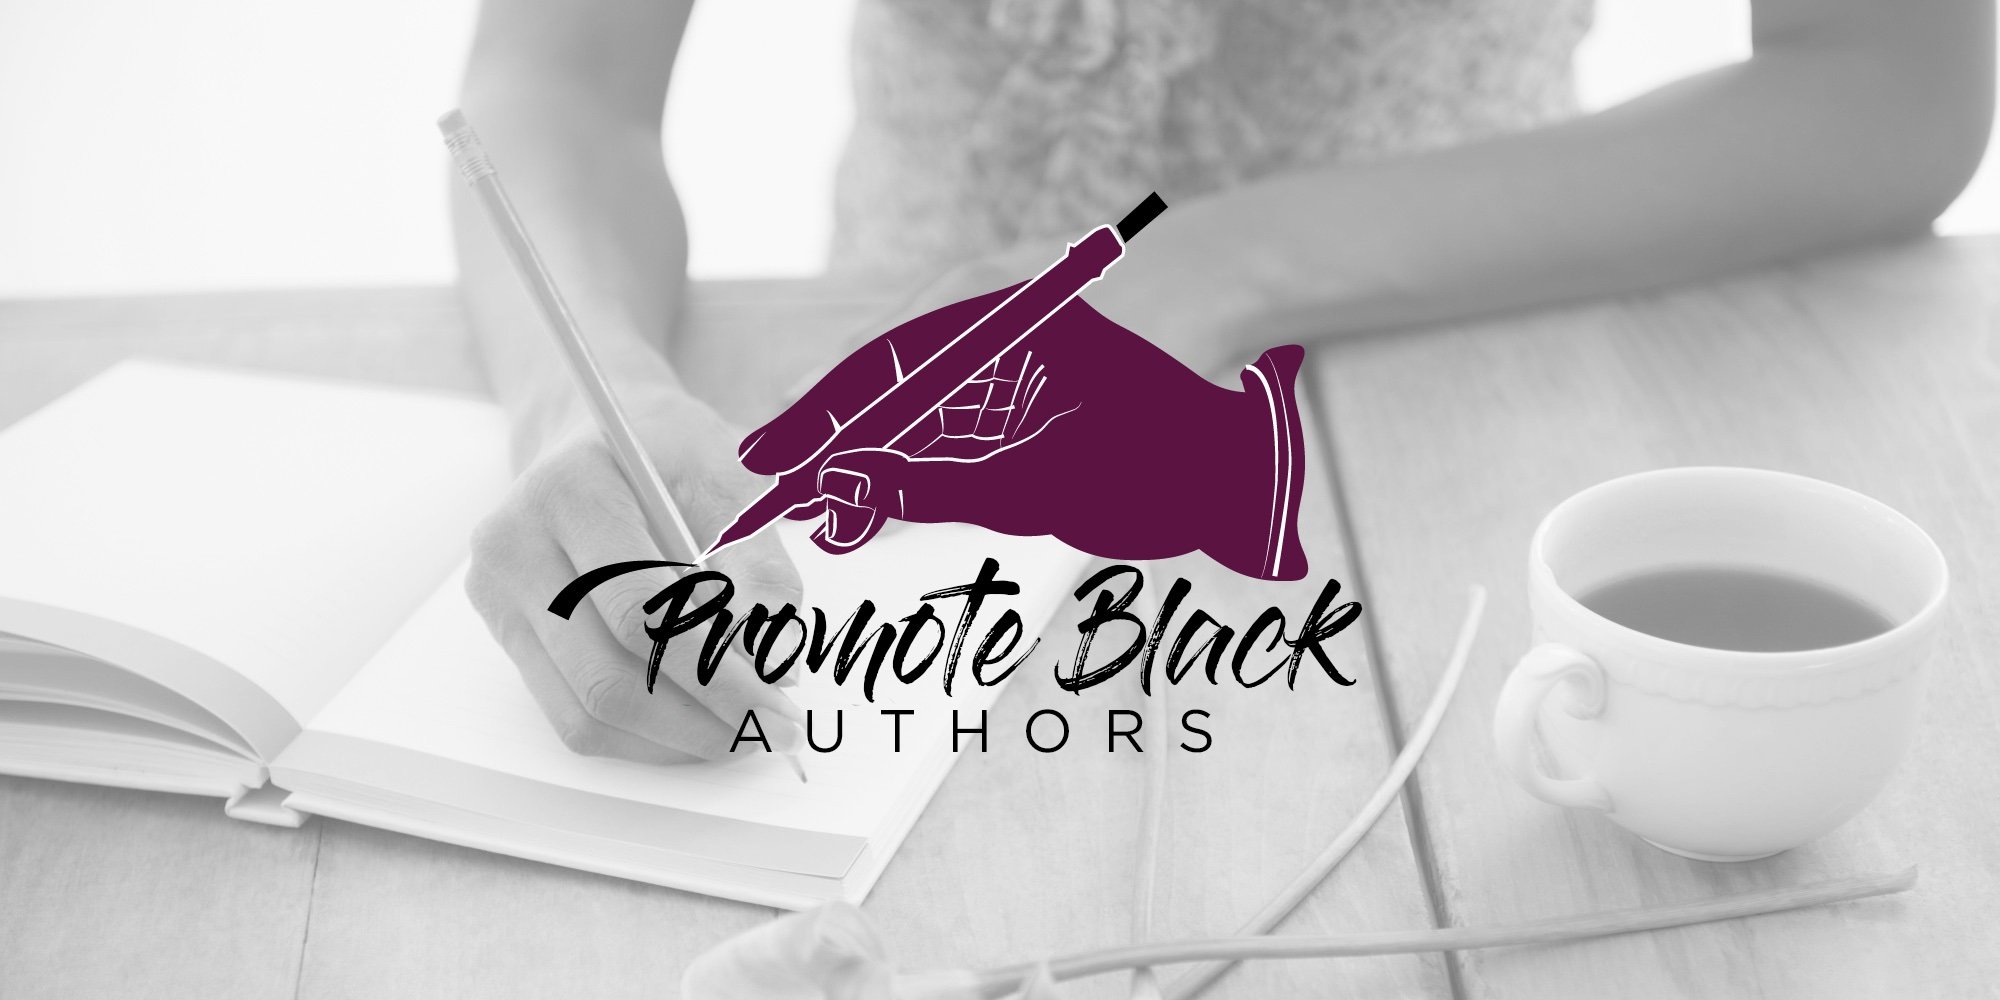 ​We are excited to launch this creative company that promotes black authors by providing unique marketing services to authors around the world.